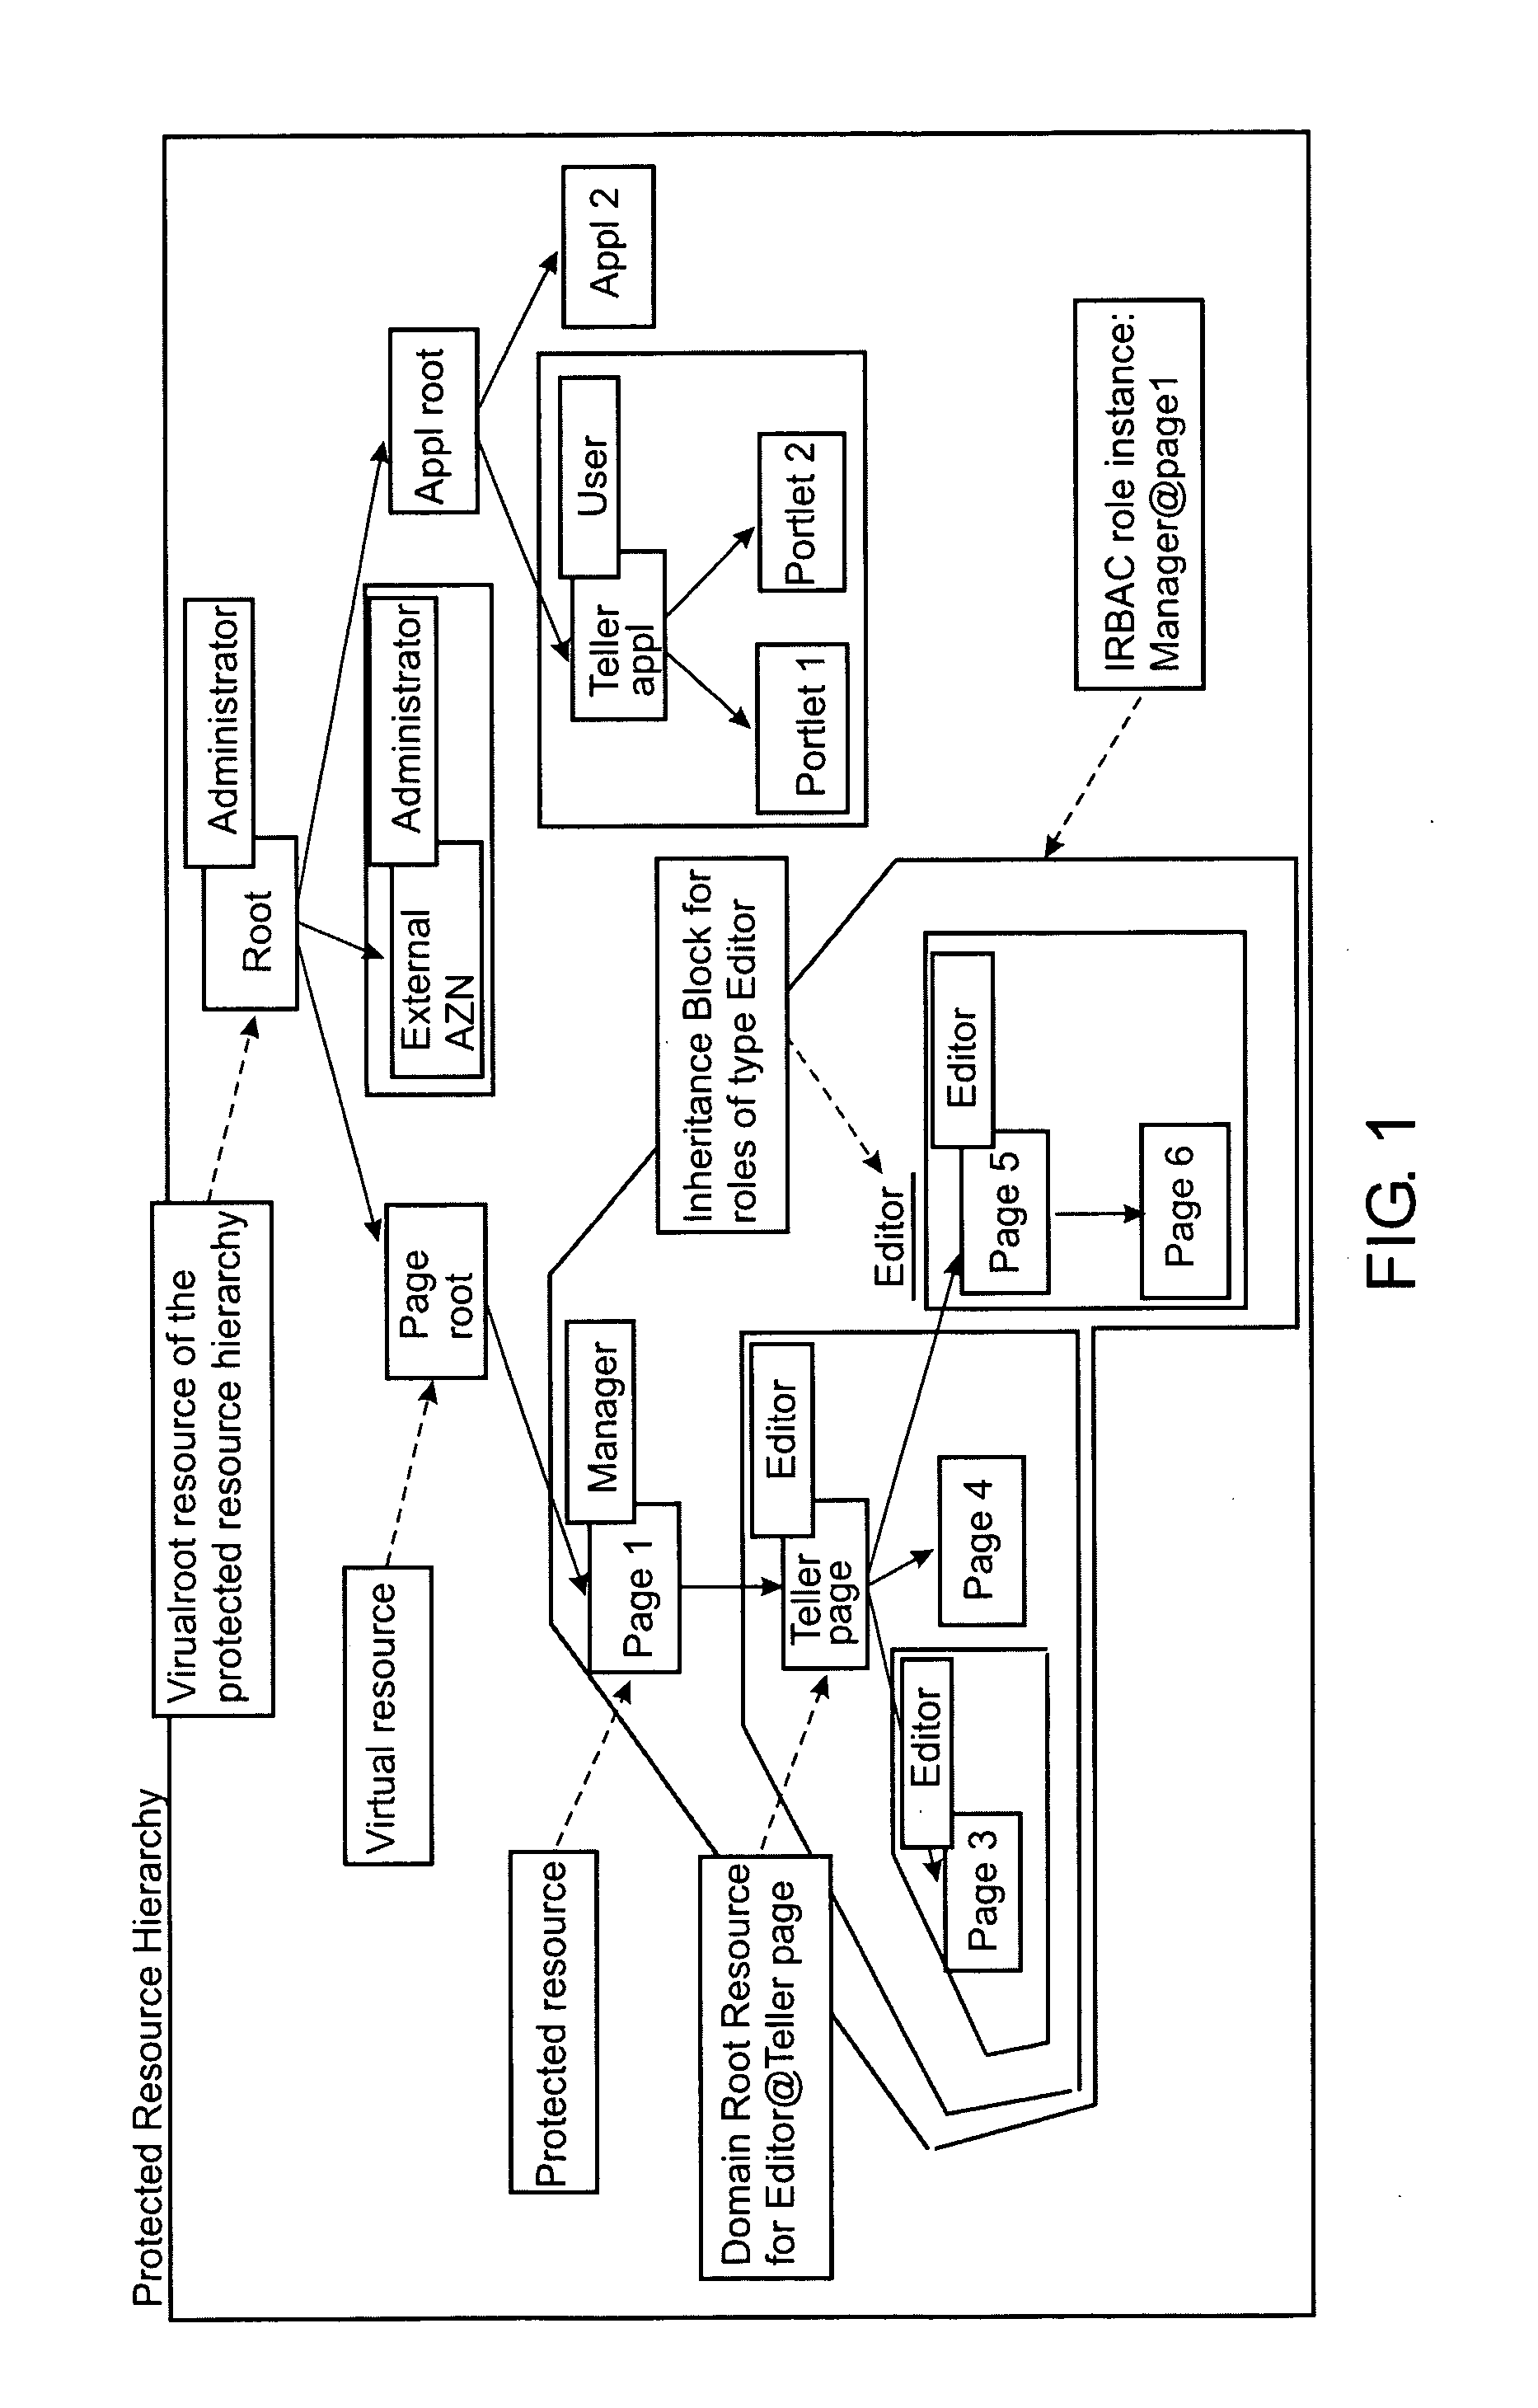 Role-based access control system, method and computer program product